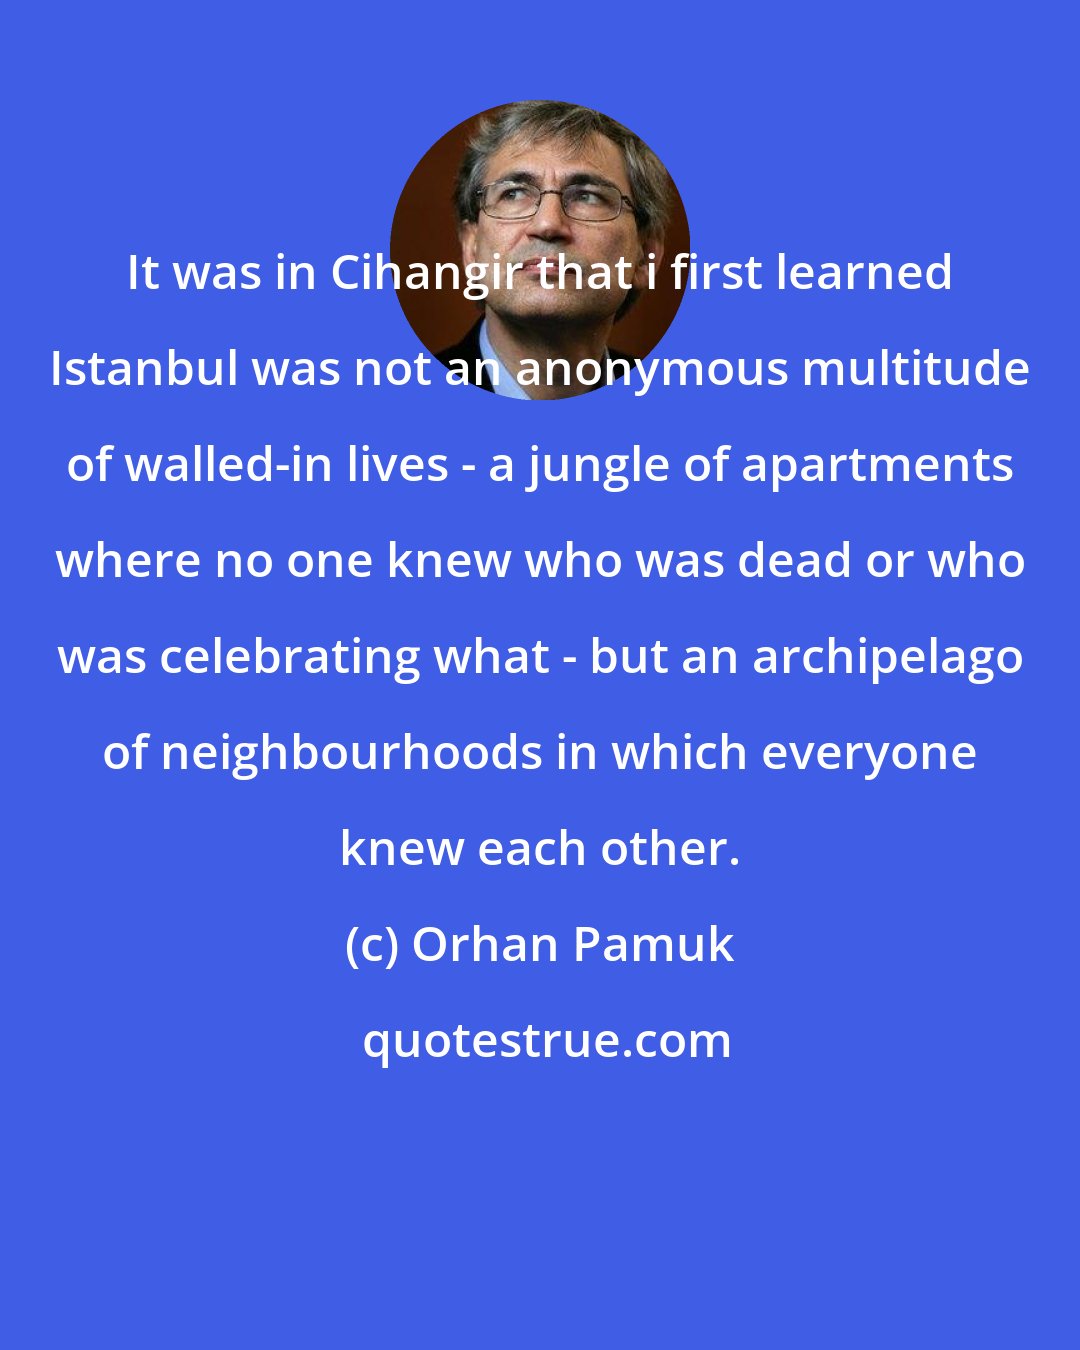 Orhan Pamuk: It was in Cihangir that i first learned Istanbul was not an anonymous multitude of walled-in lives - a jungle of apartments where no one knew who was dead or who was celebrating what - but an archipelago of neighbourhoods in which everyone knew each other.